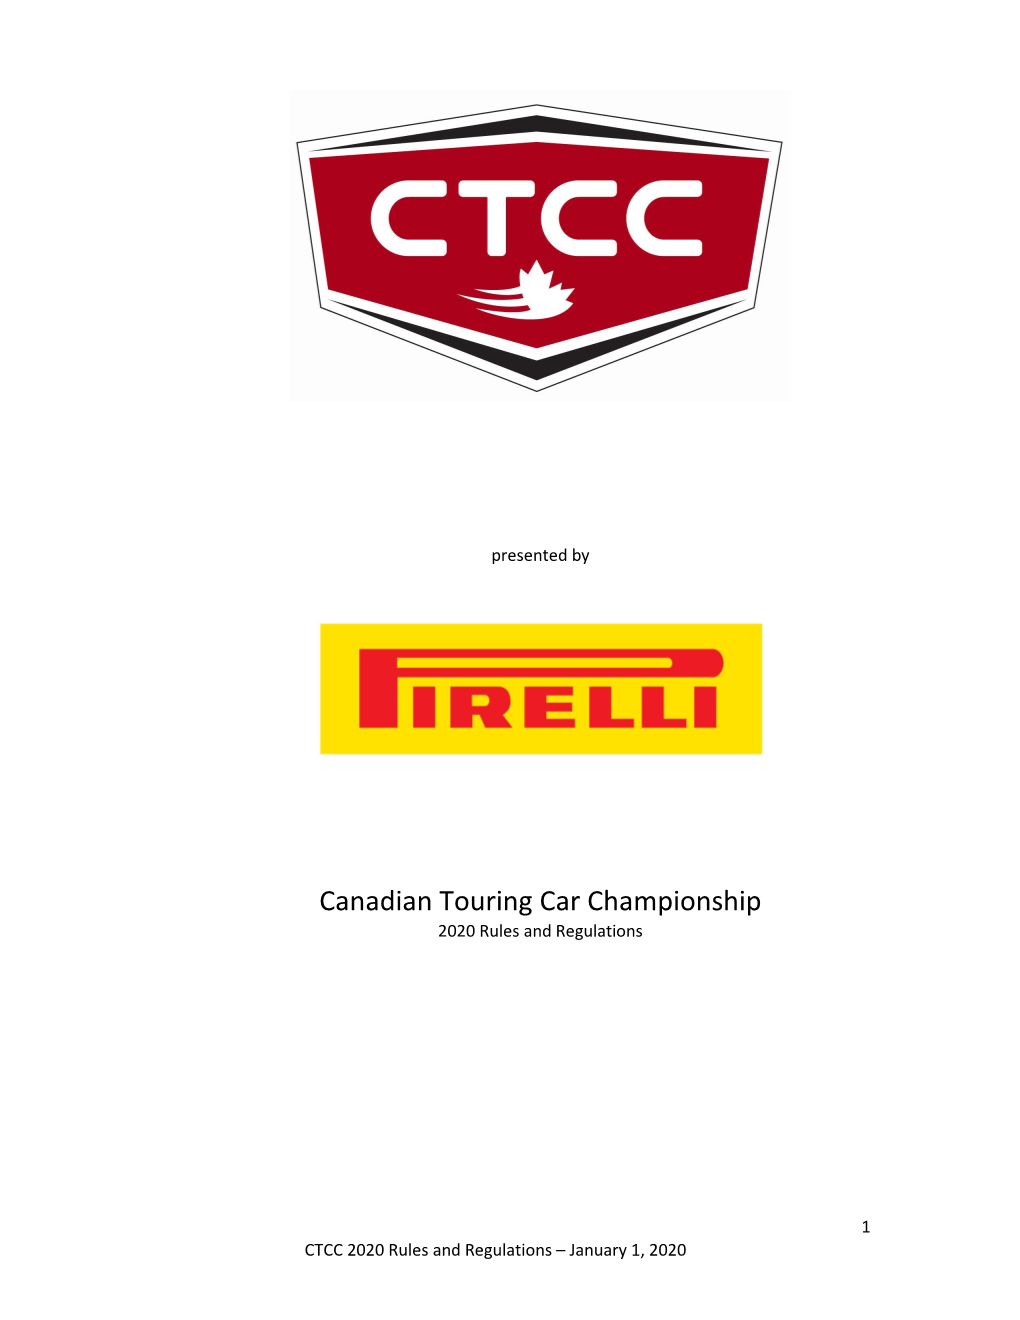 Canadian Touring Car Championship 2020 Rules and Regulations